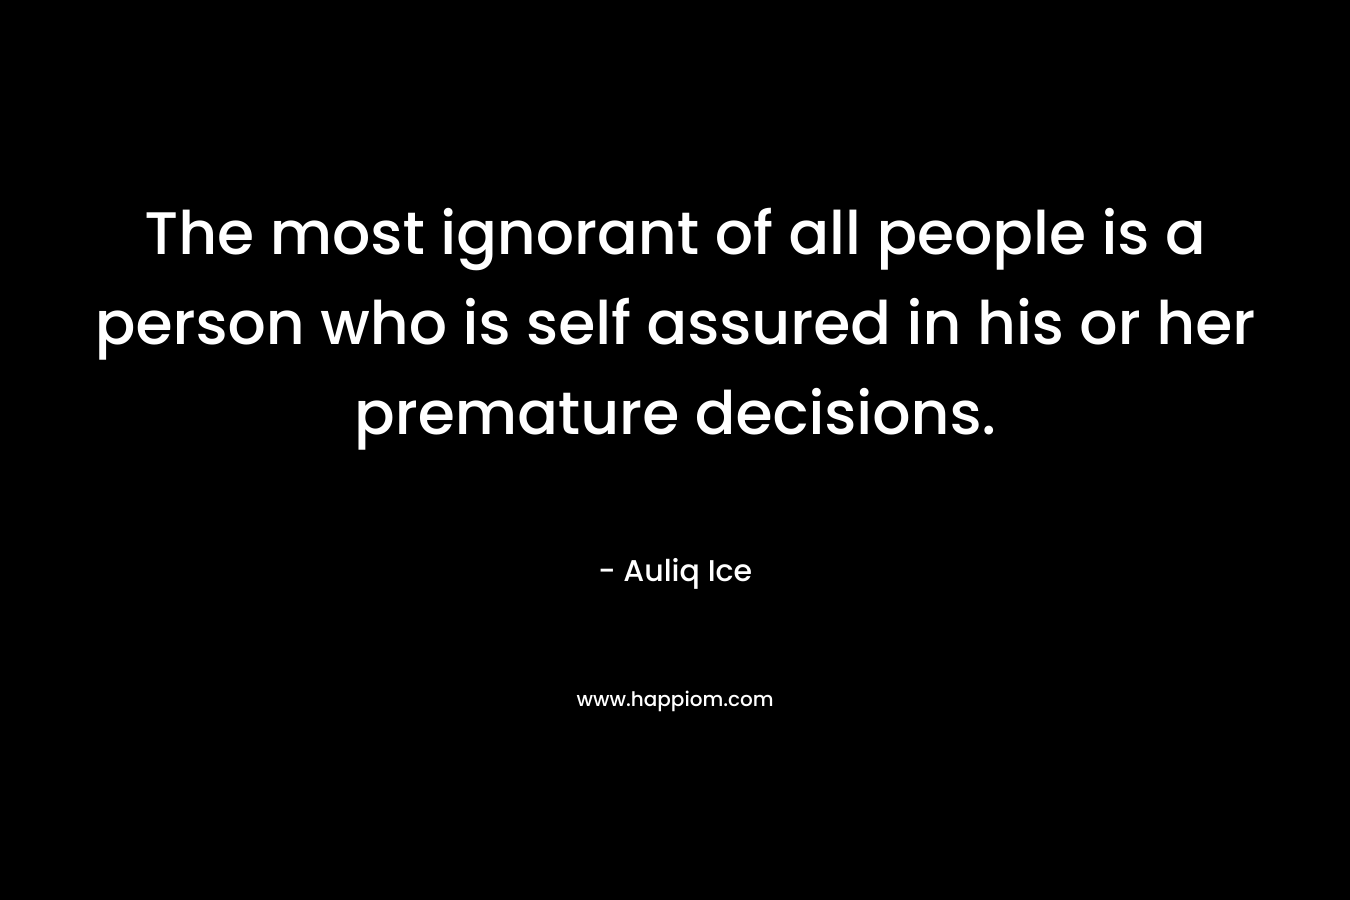 The most ignorant of all people is a person who is self assured in his or her premature decisions.